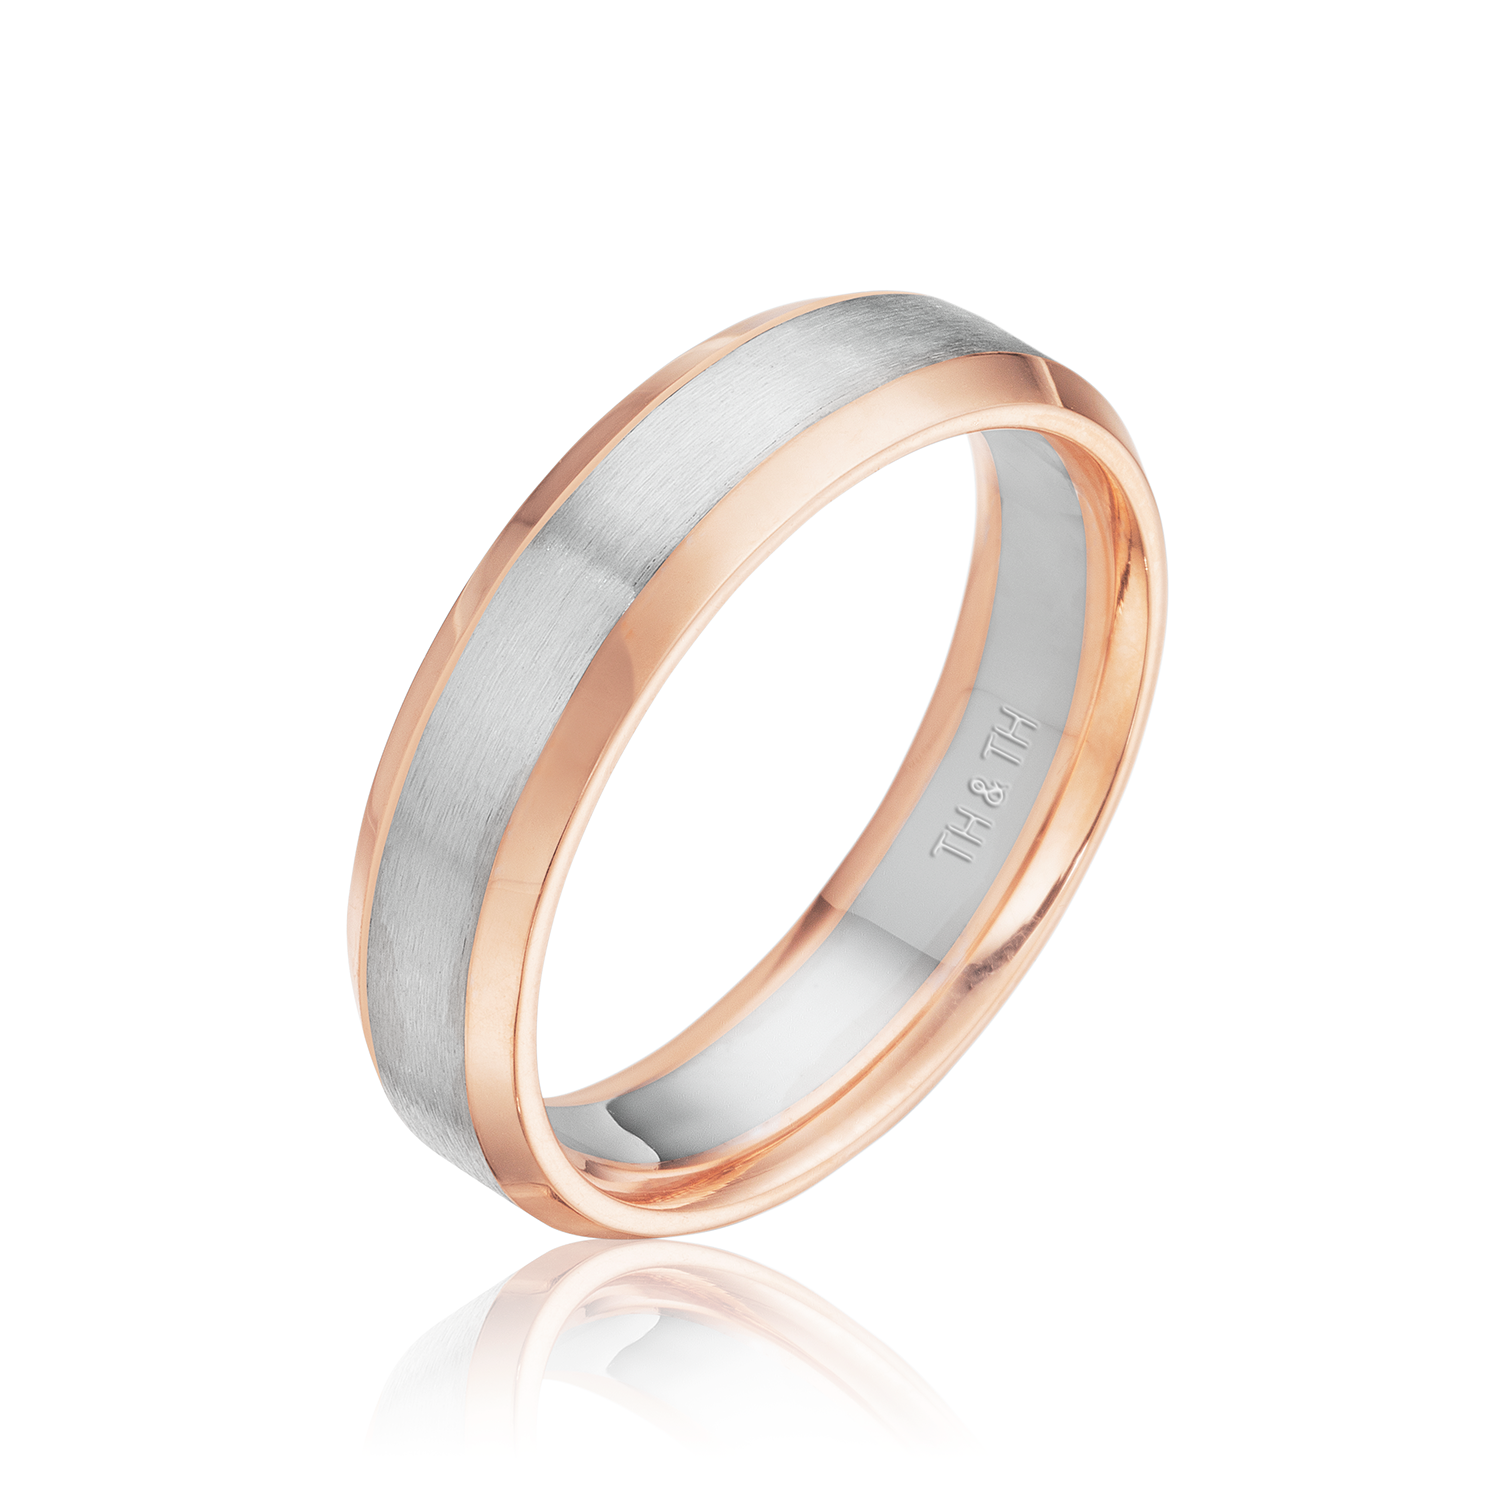 Beveled Gold Wedding Band in Platinum and Rose Gold